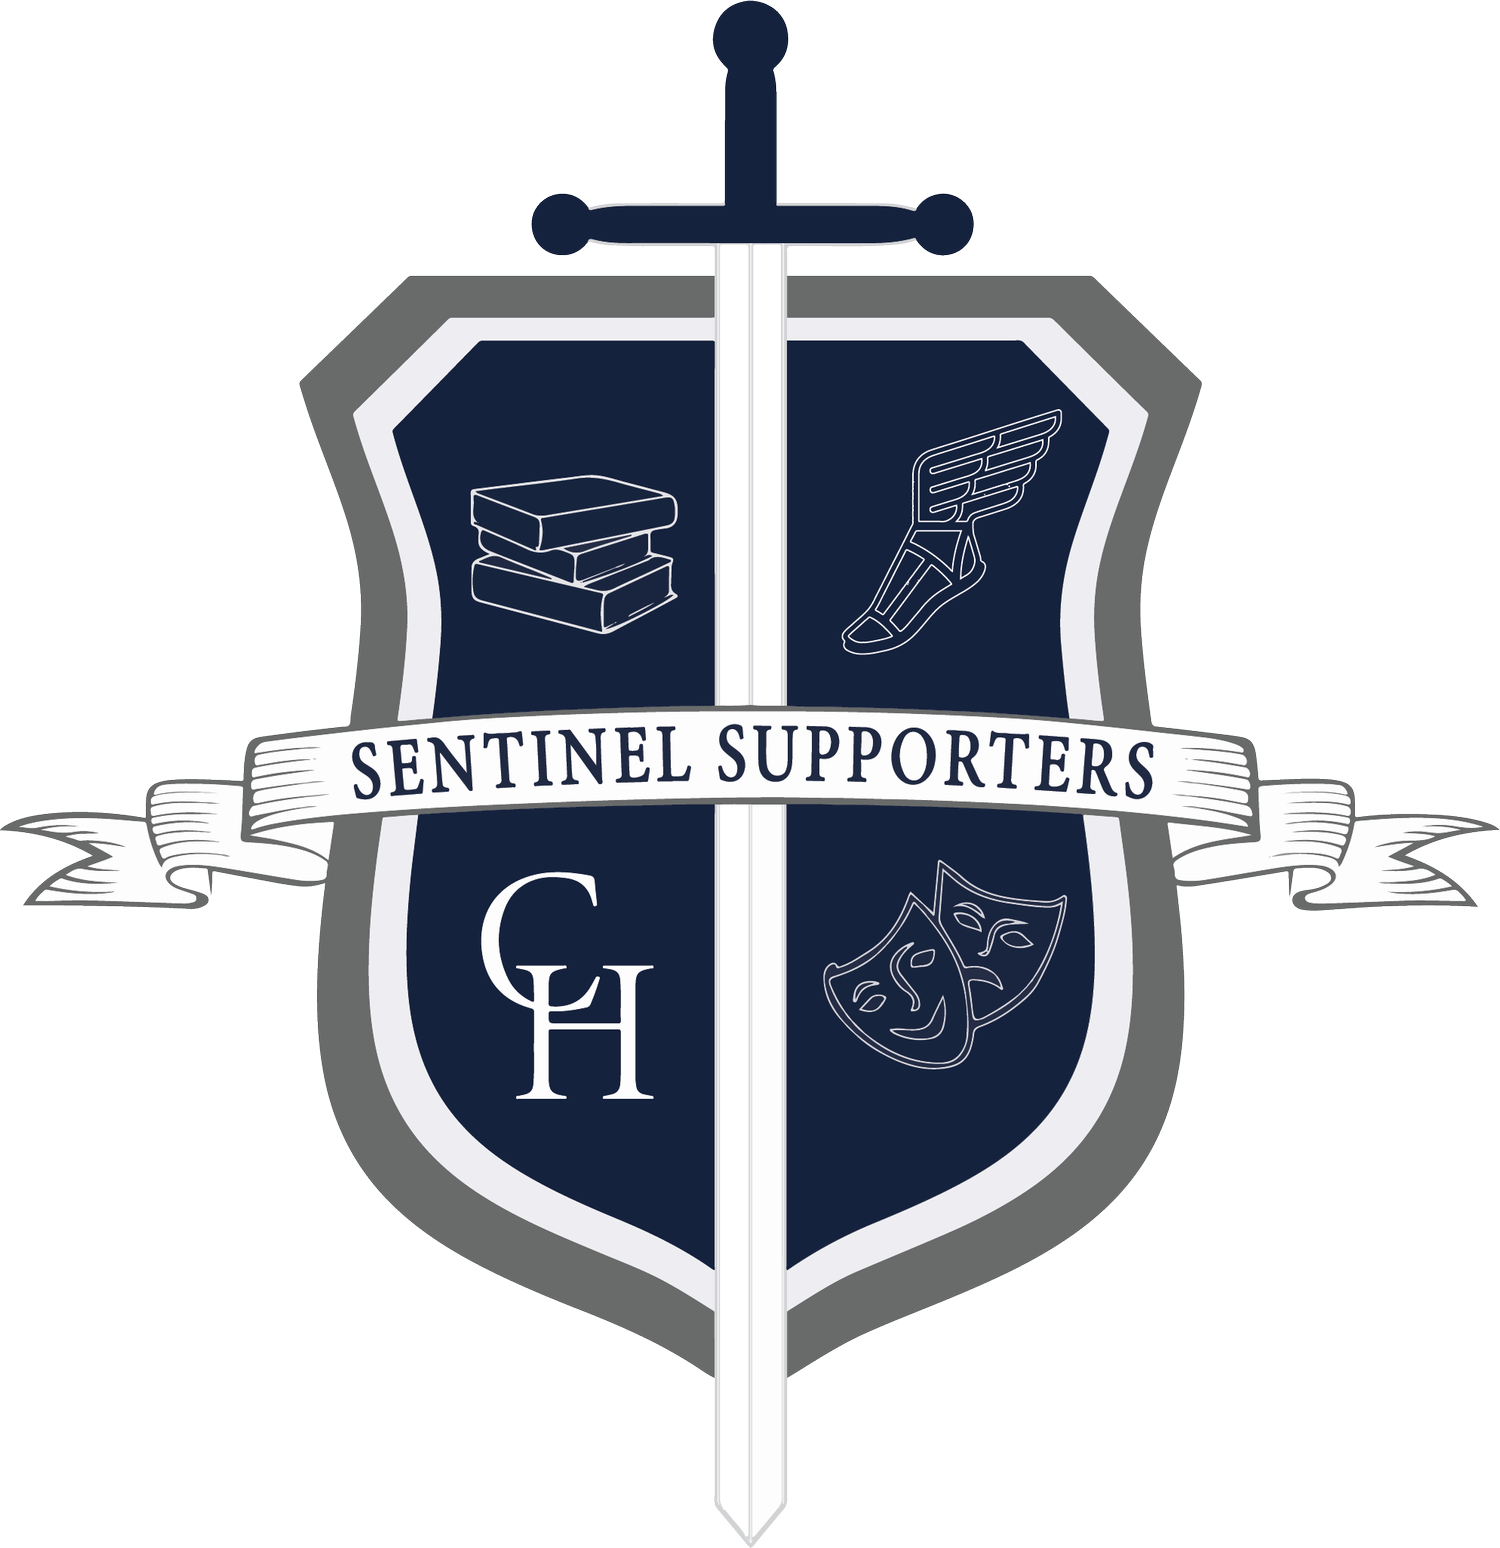 Sentinel Supporters